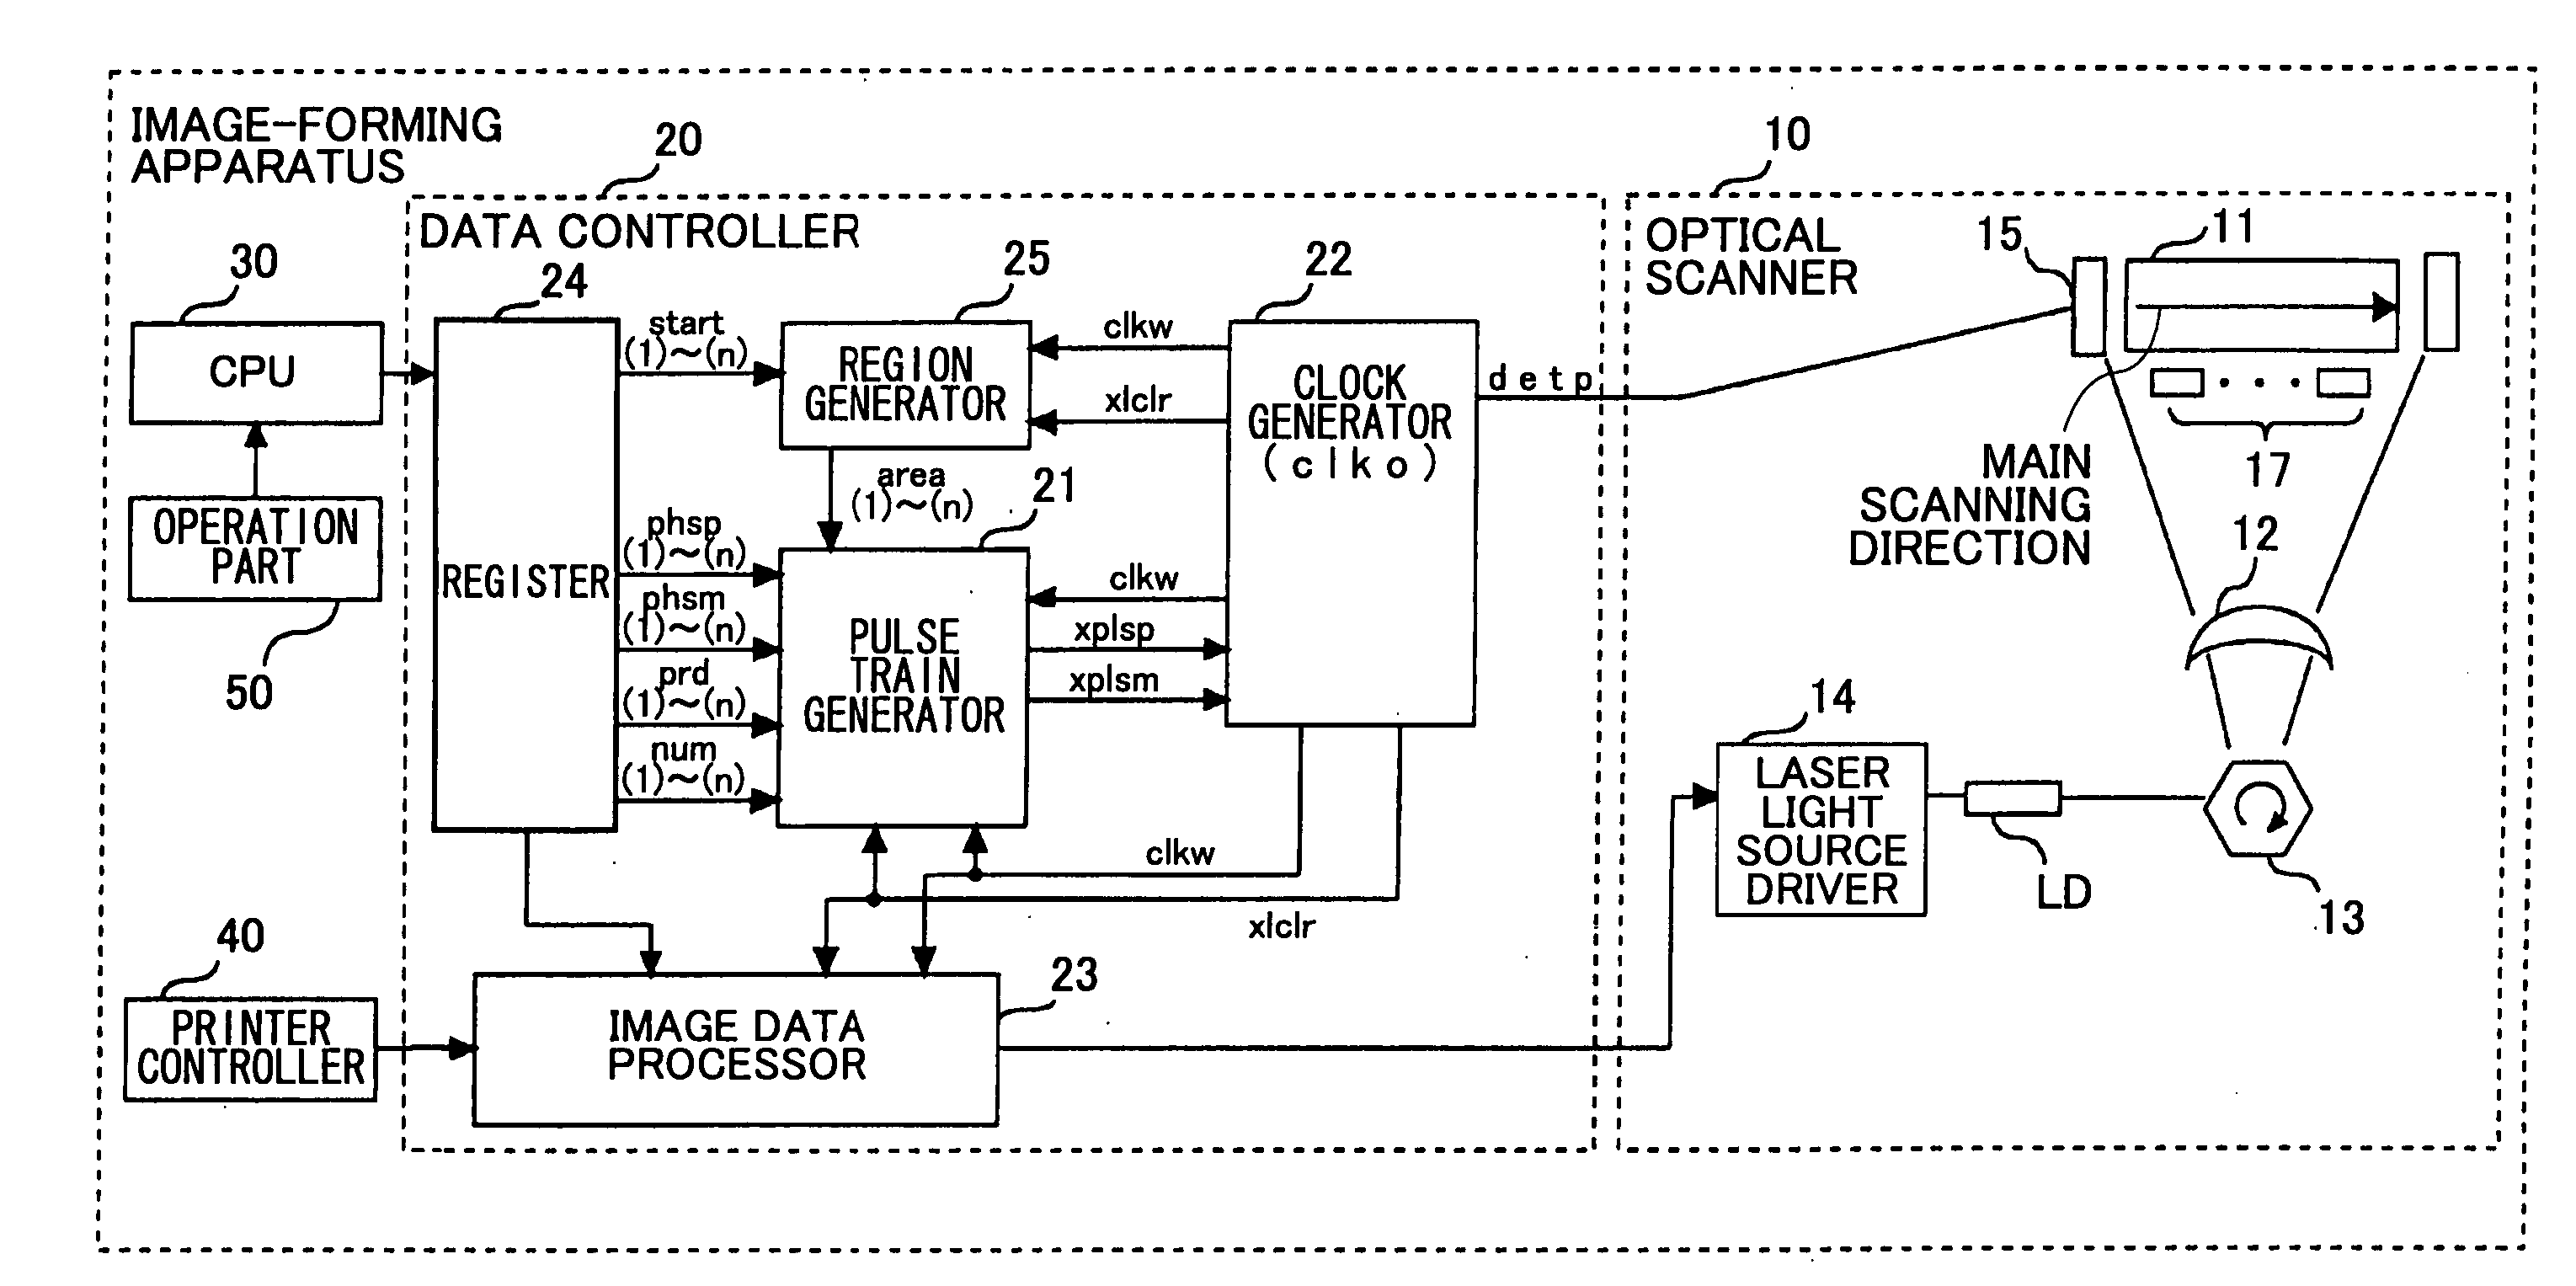 Image-forming apparatus and optical scanner